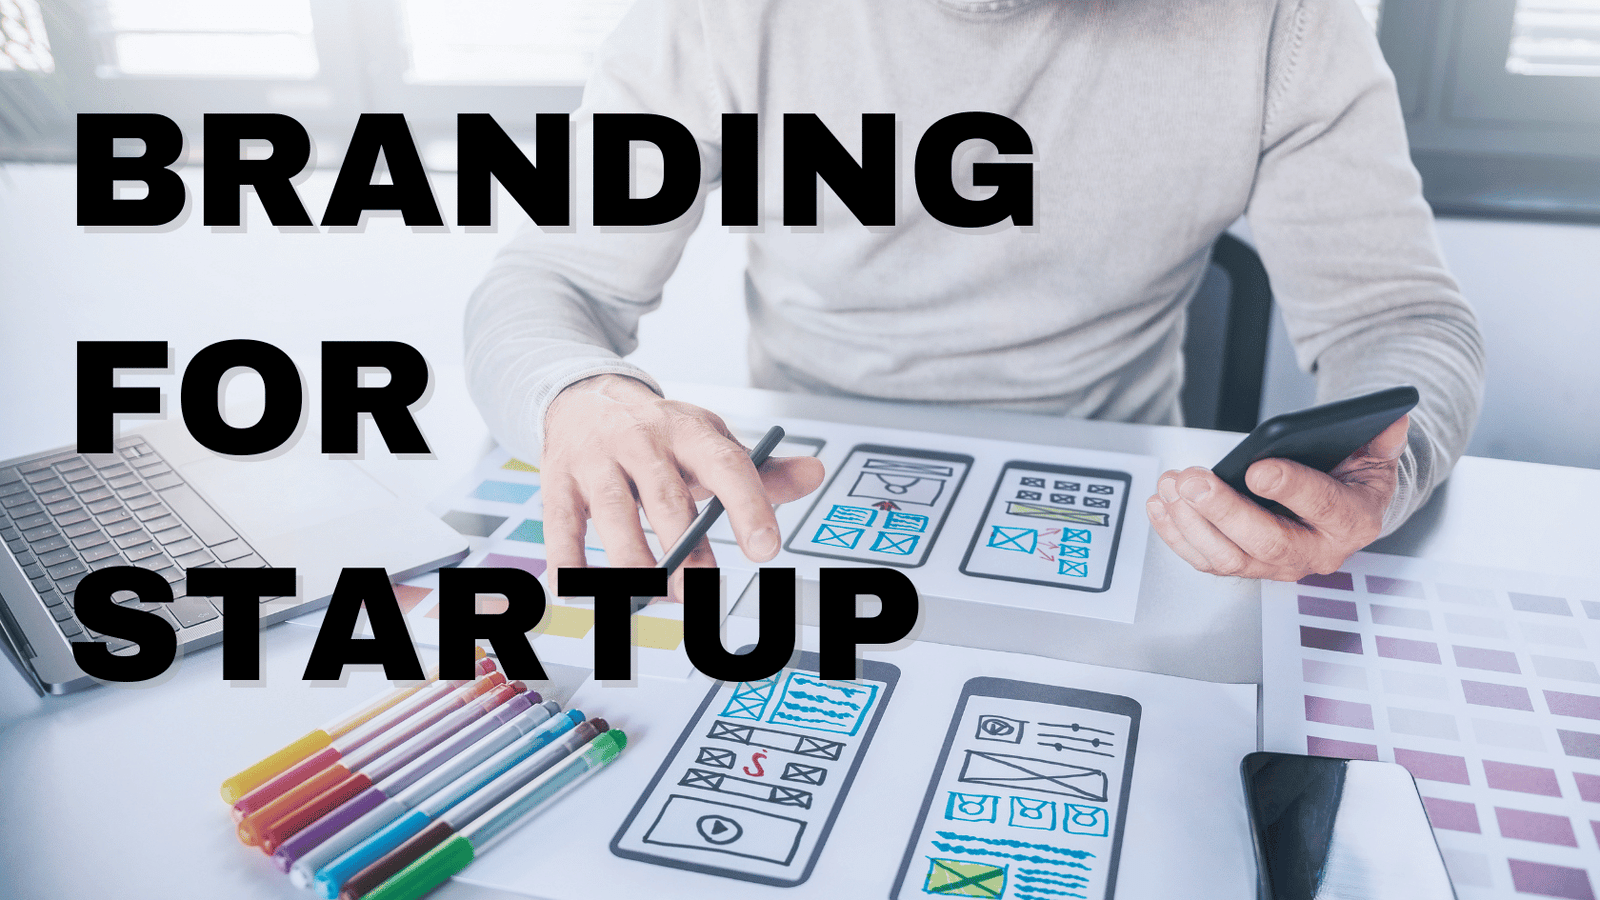 Learn key branding strategies to make your startup stand out. Discover how to connect with audiences and build a memorable brand for success.